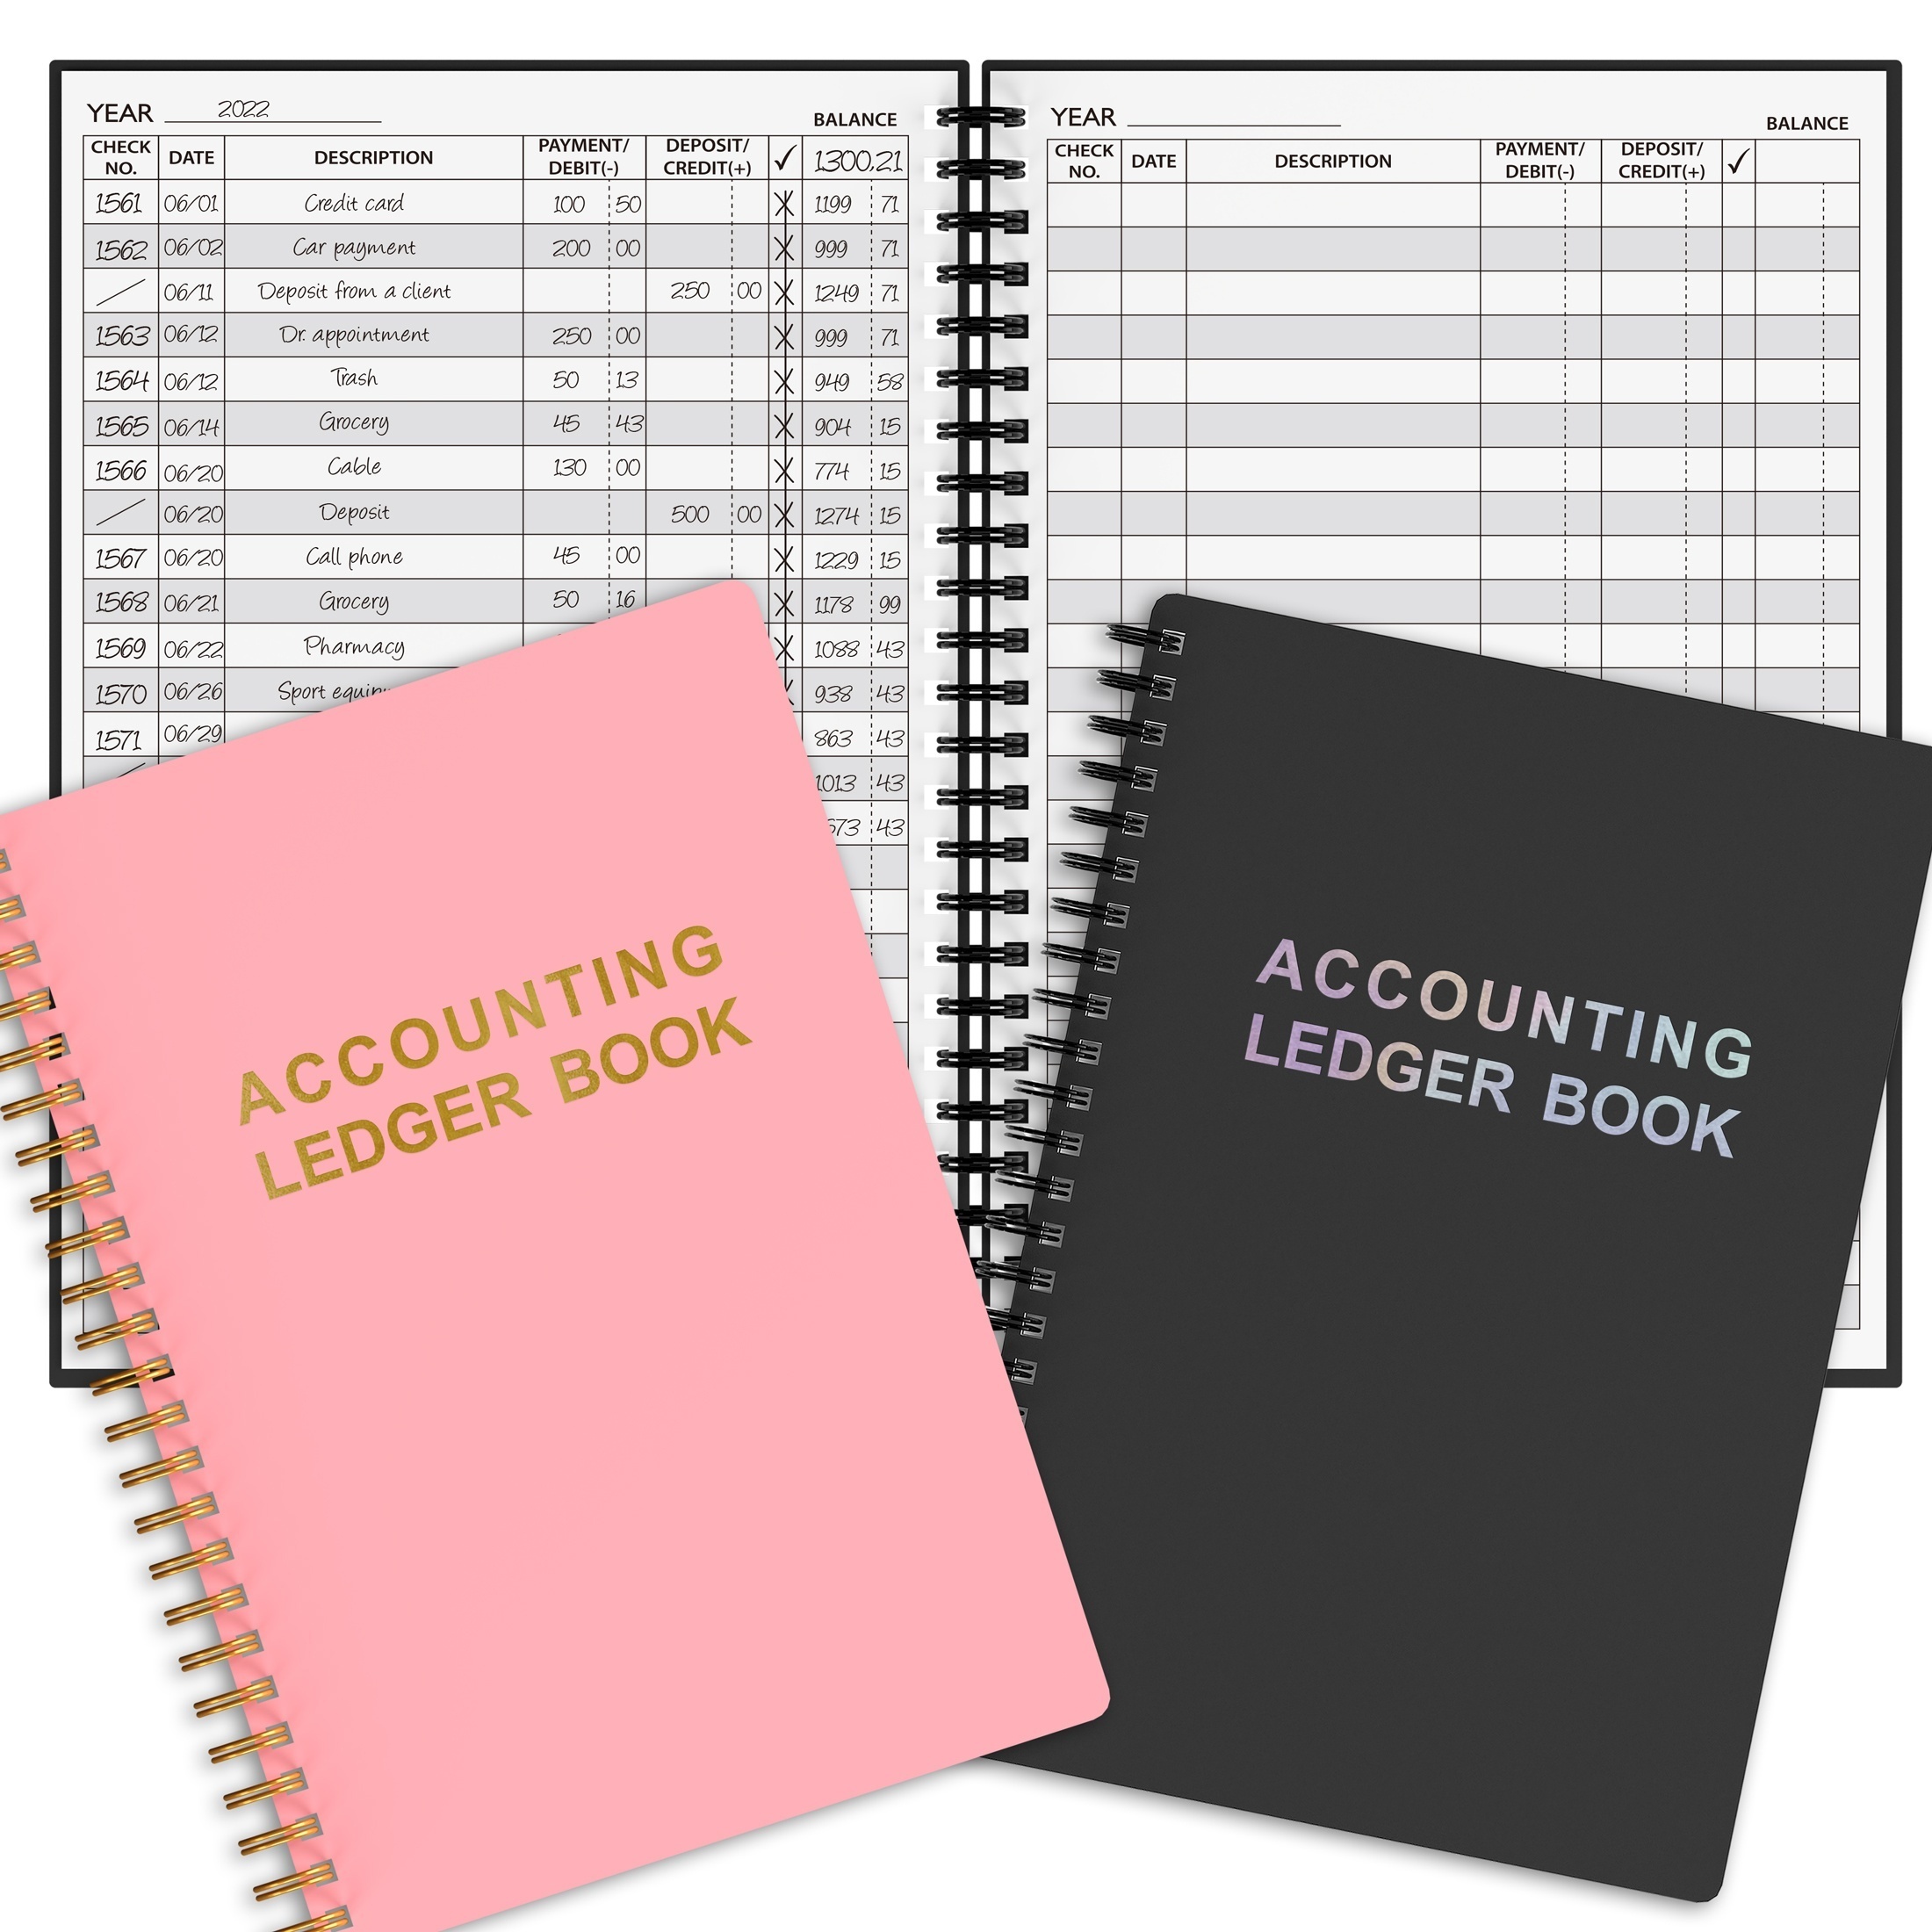 

Accounting Ledger Book - A5 Check Register For Small Businesses & Personal Use, Account Book For Tracking Money, Expenses, Deposits & Balance, 5.8" X 8.6